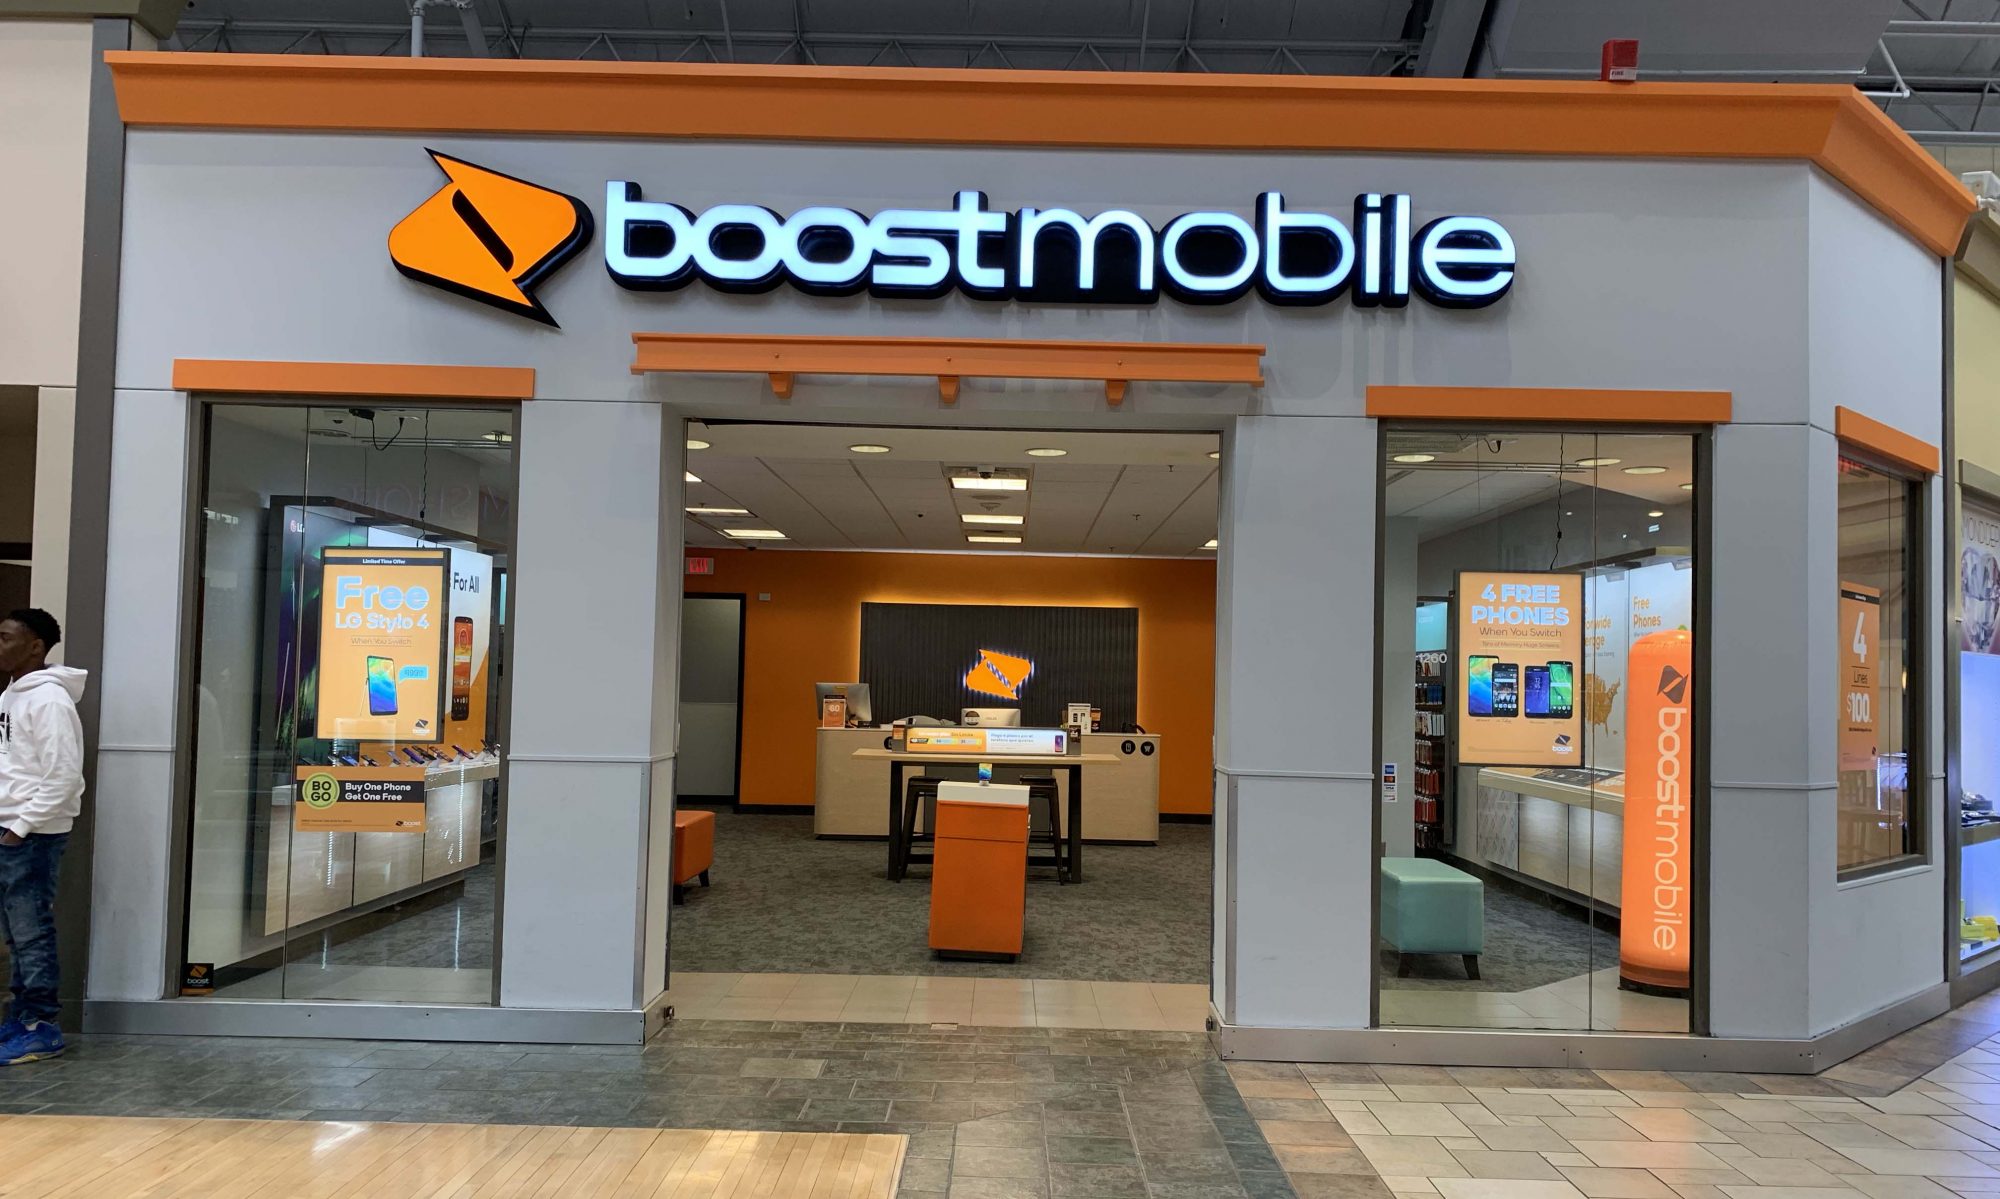 boost mobile franchise opportunity business